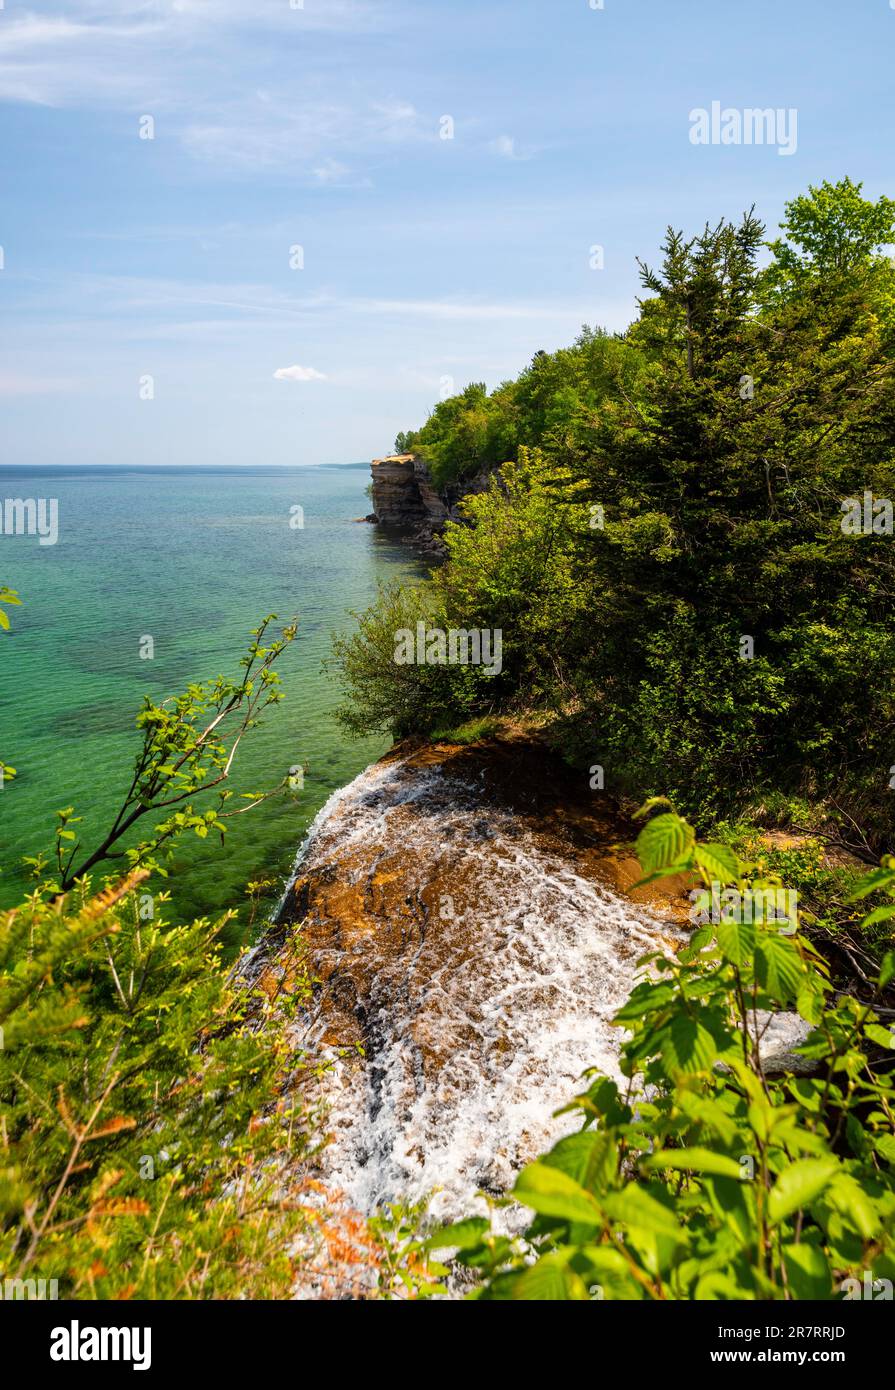 Photograph of the top of Spray Falls while on a morning hike, Pictured Rocks National Lakeshore, Munising, MIchigan, USA. Stock Photo